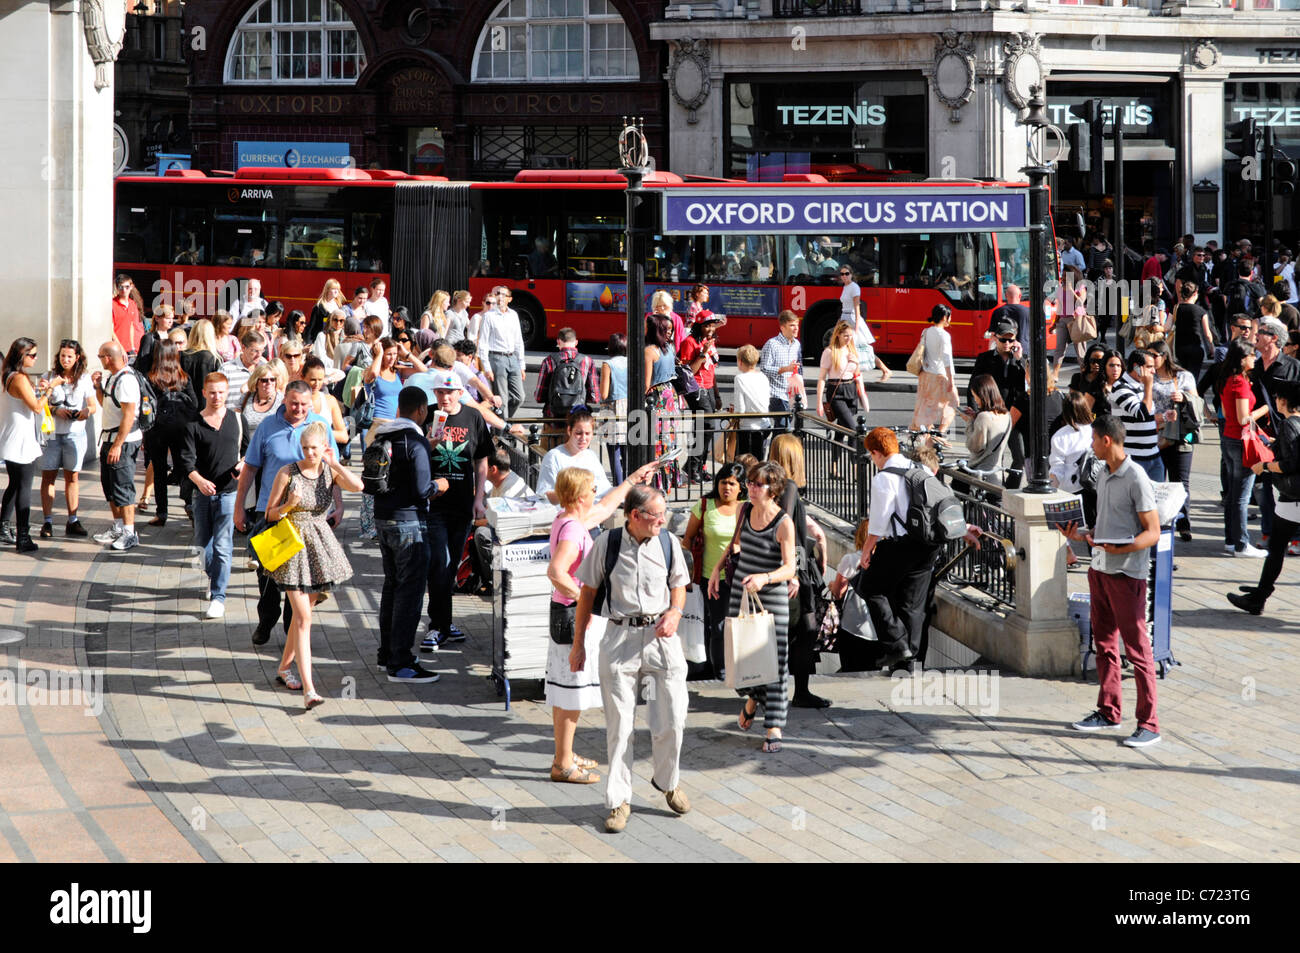 London street scene crowd of people around Oxford Circus & underground tube station at busy retail shopping area & West End road junction England UK Stock Photo